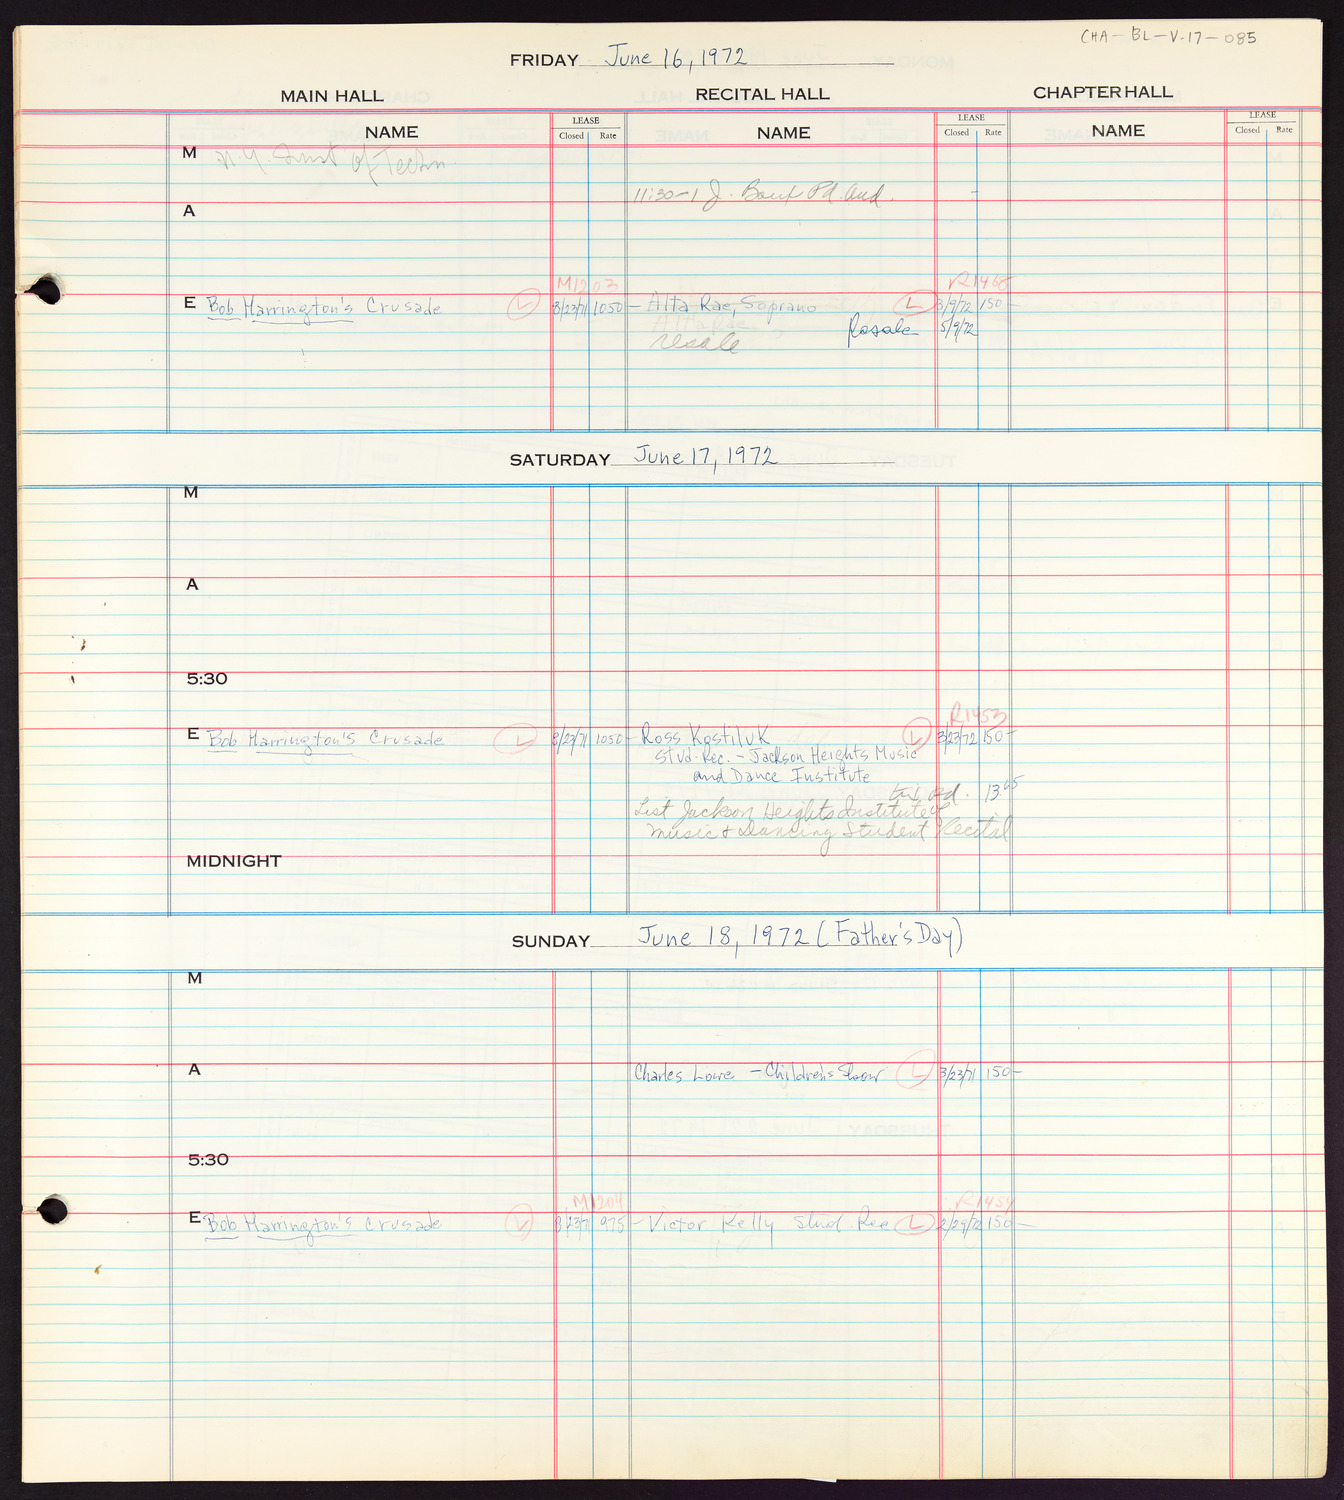 Carnegie Hall Booking Ledger, volume 17, page 85